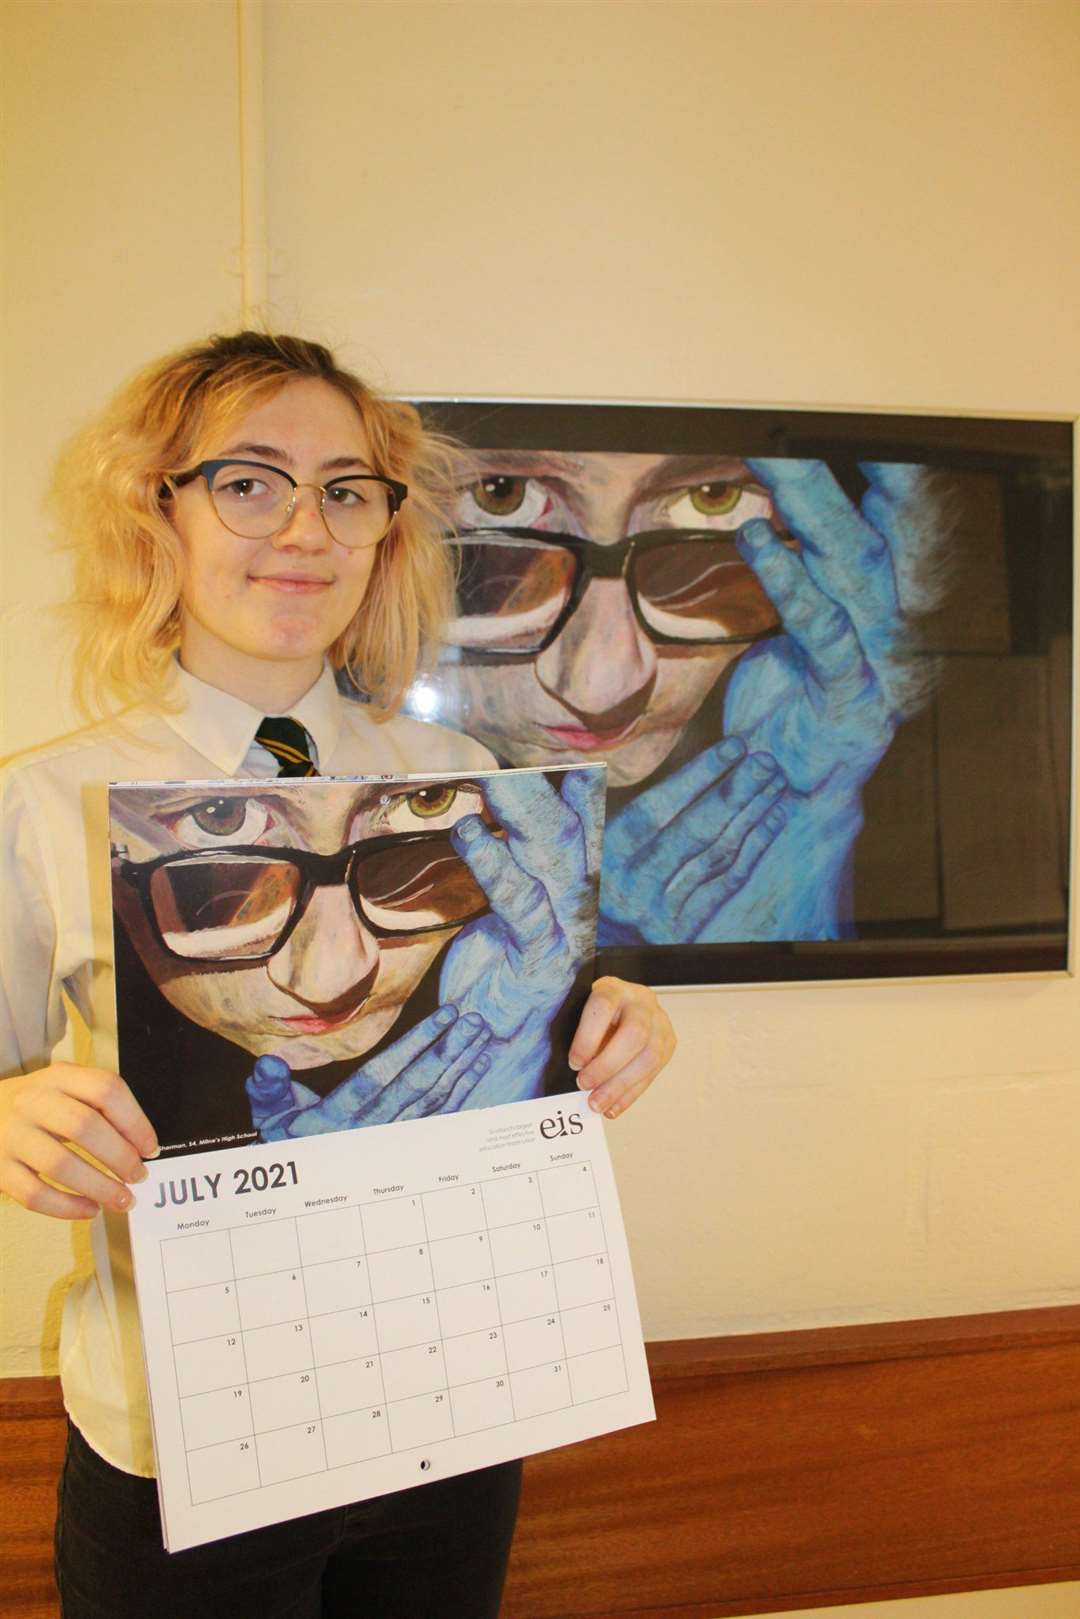 Hazel Sherman proudly shows off her artwork in the EIS calendar.